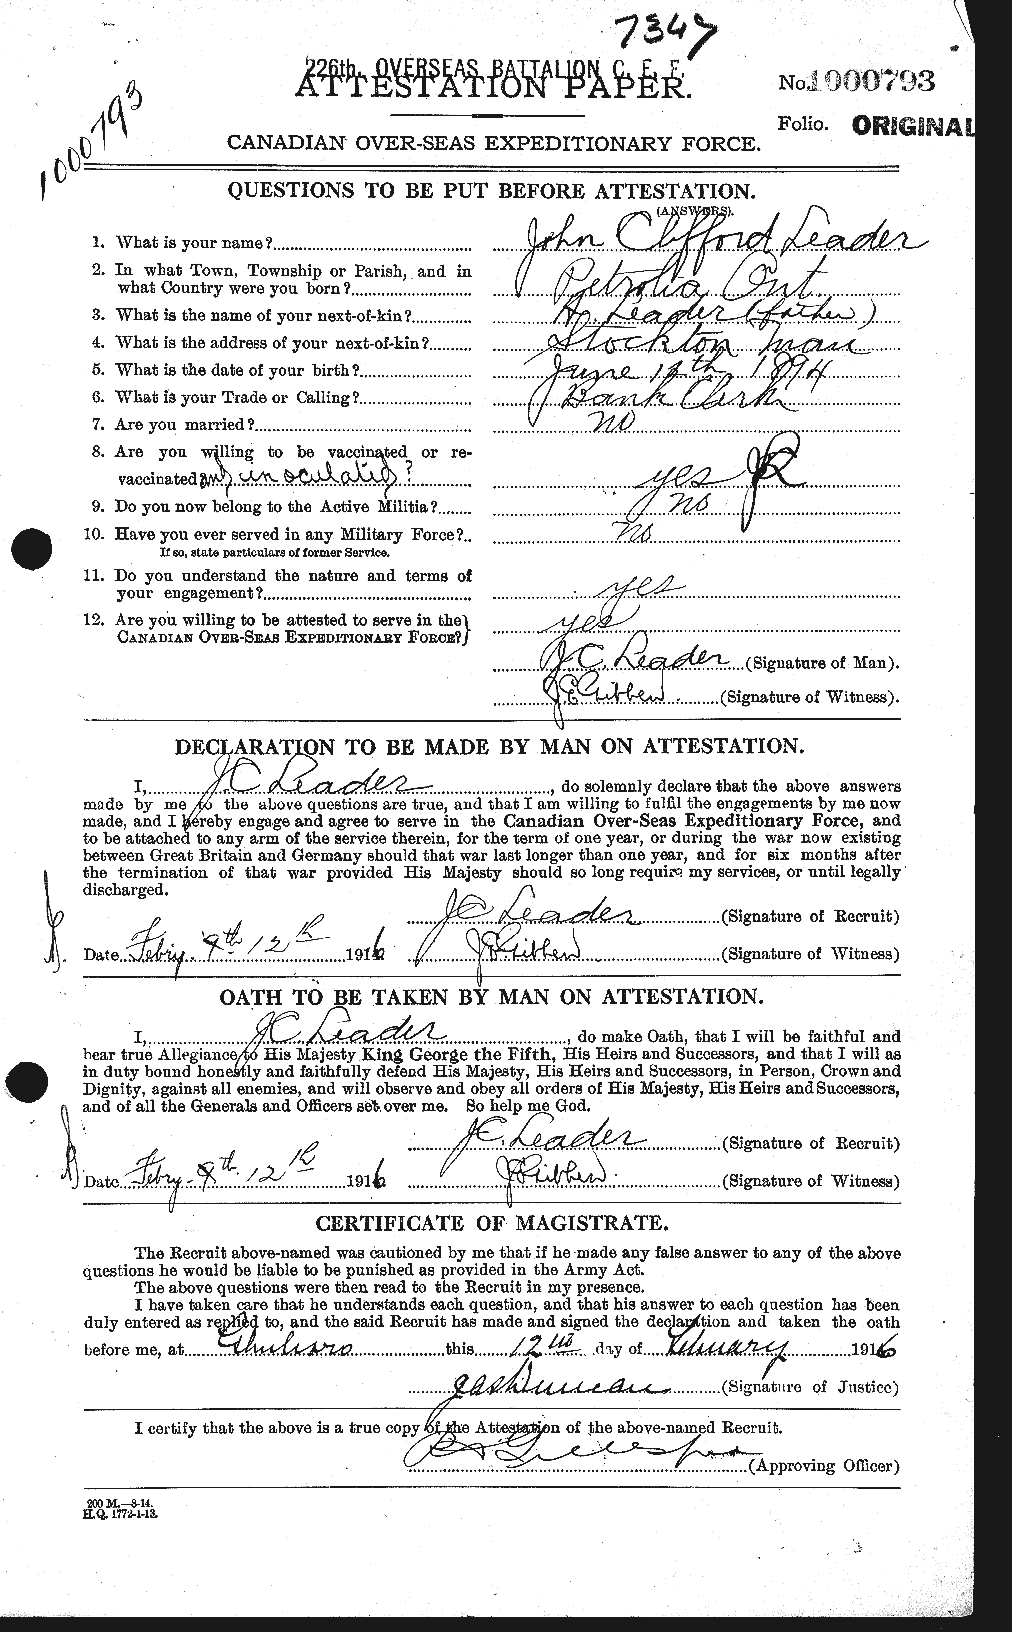 Personnel Records of the First World War - CEF 455874a